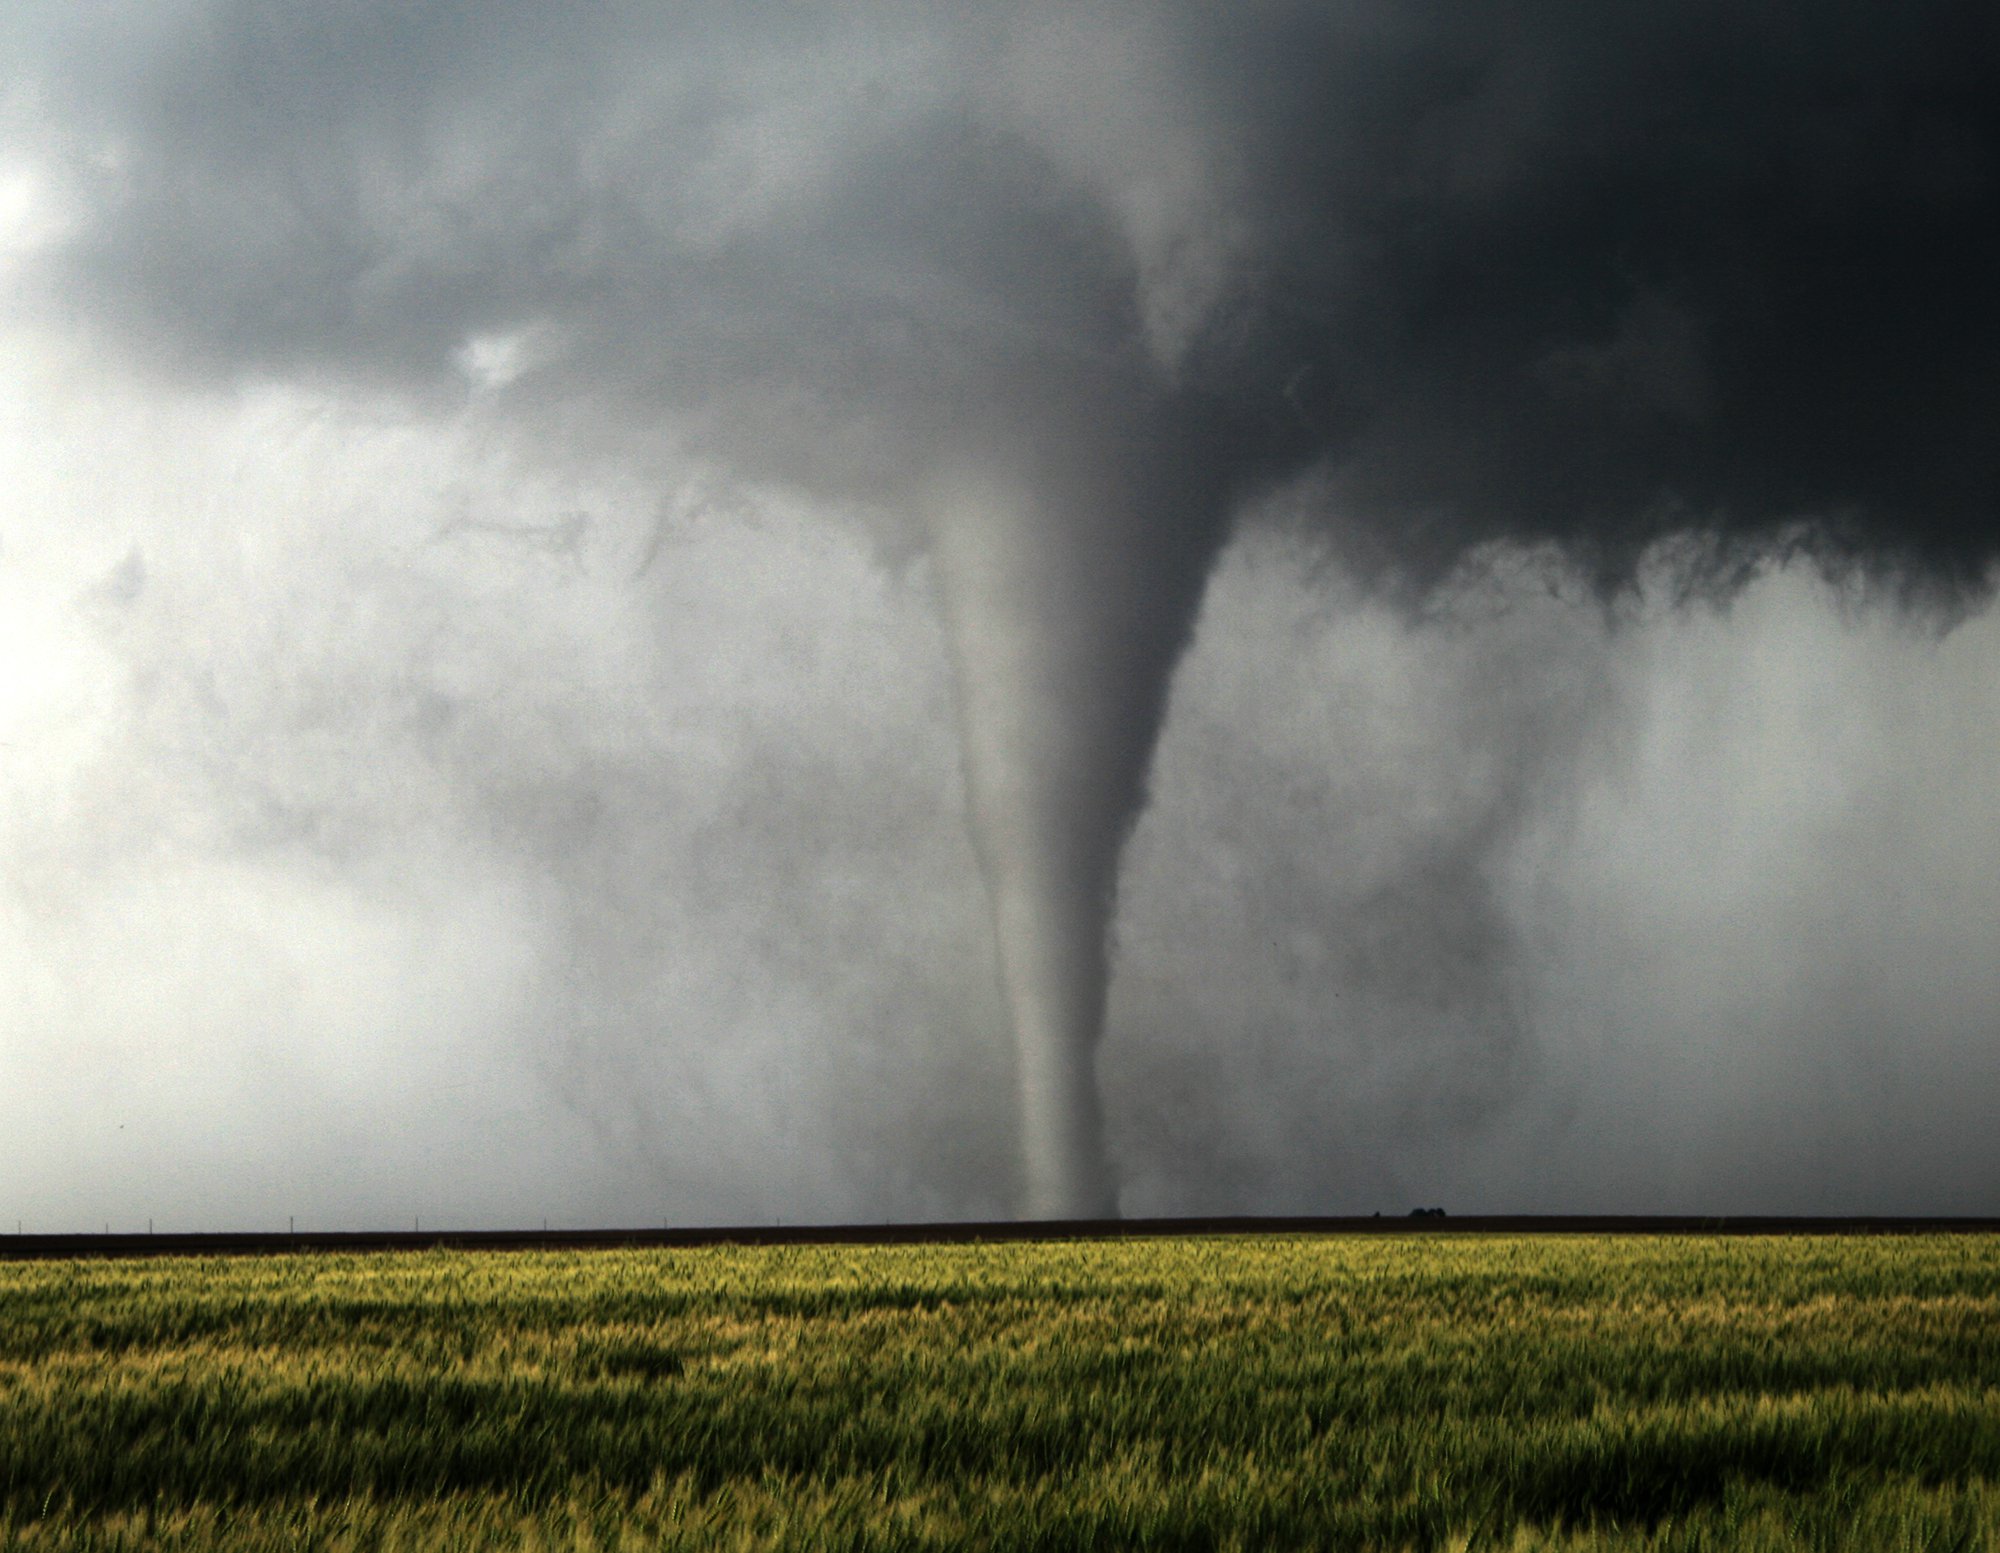 One of 17 tornadoes on day 7